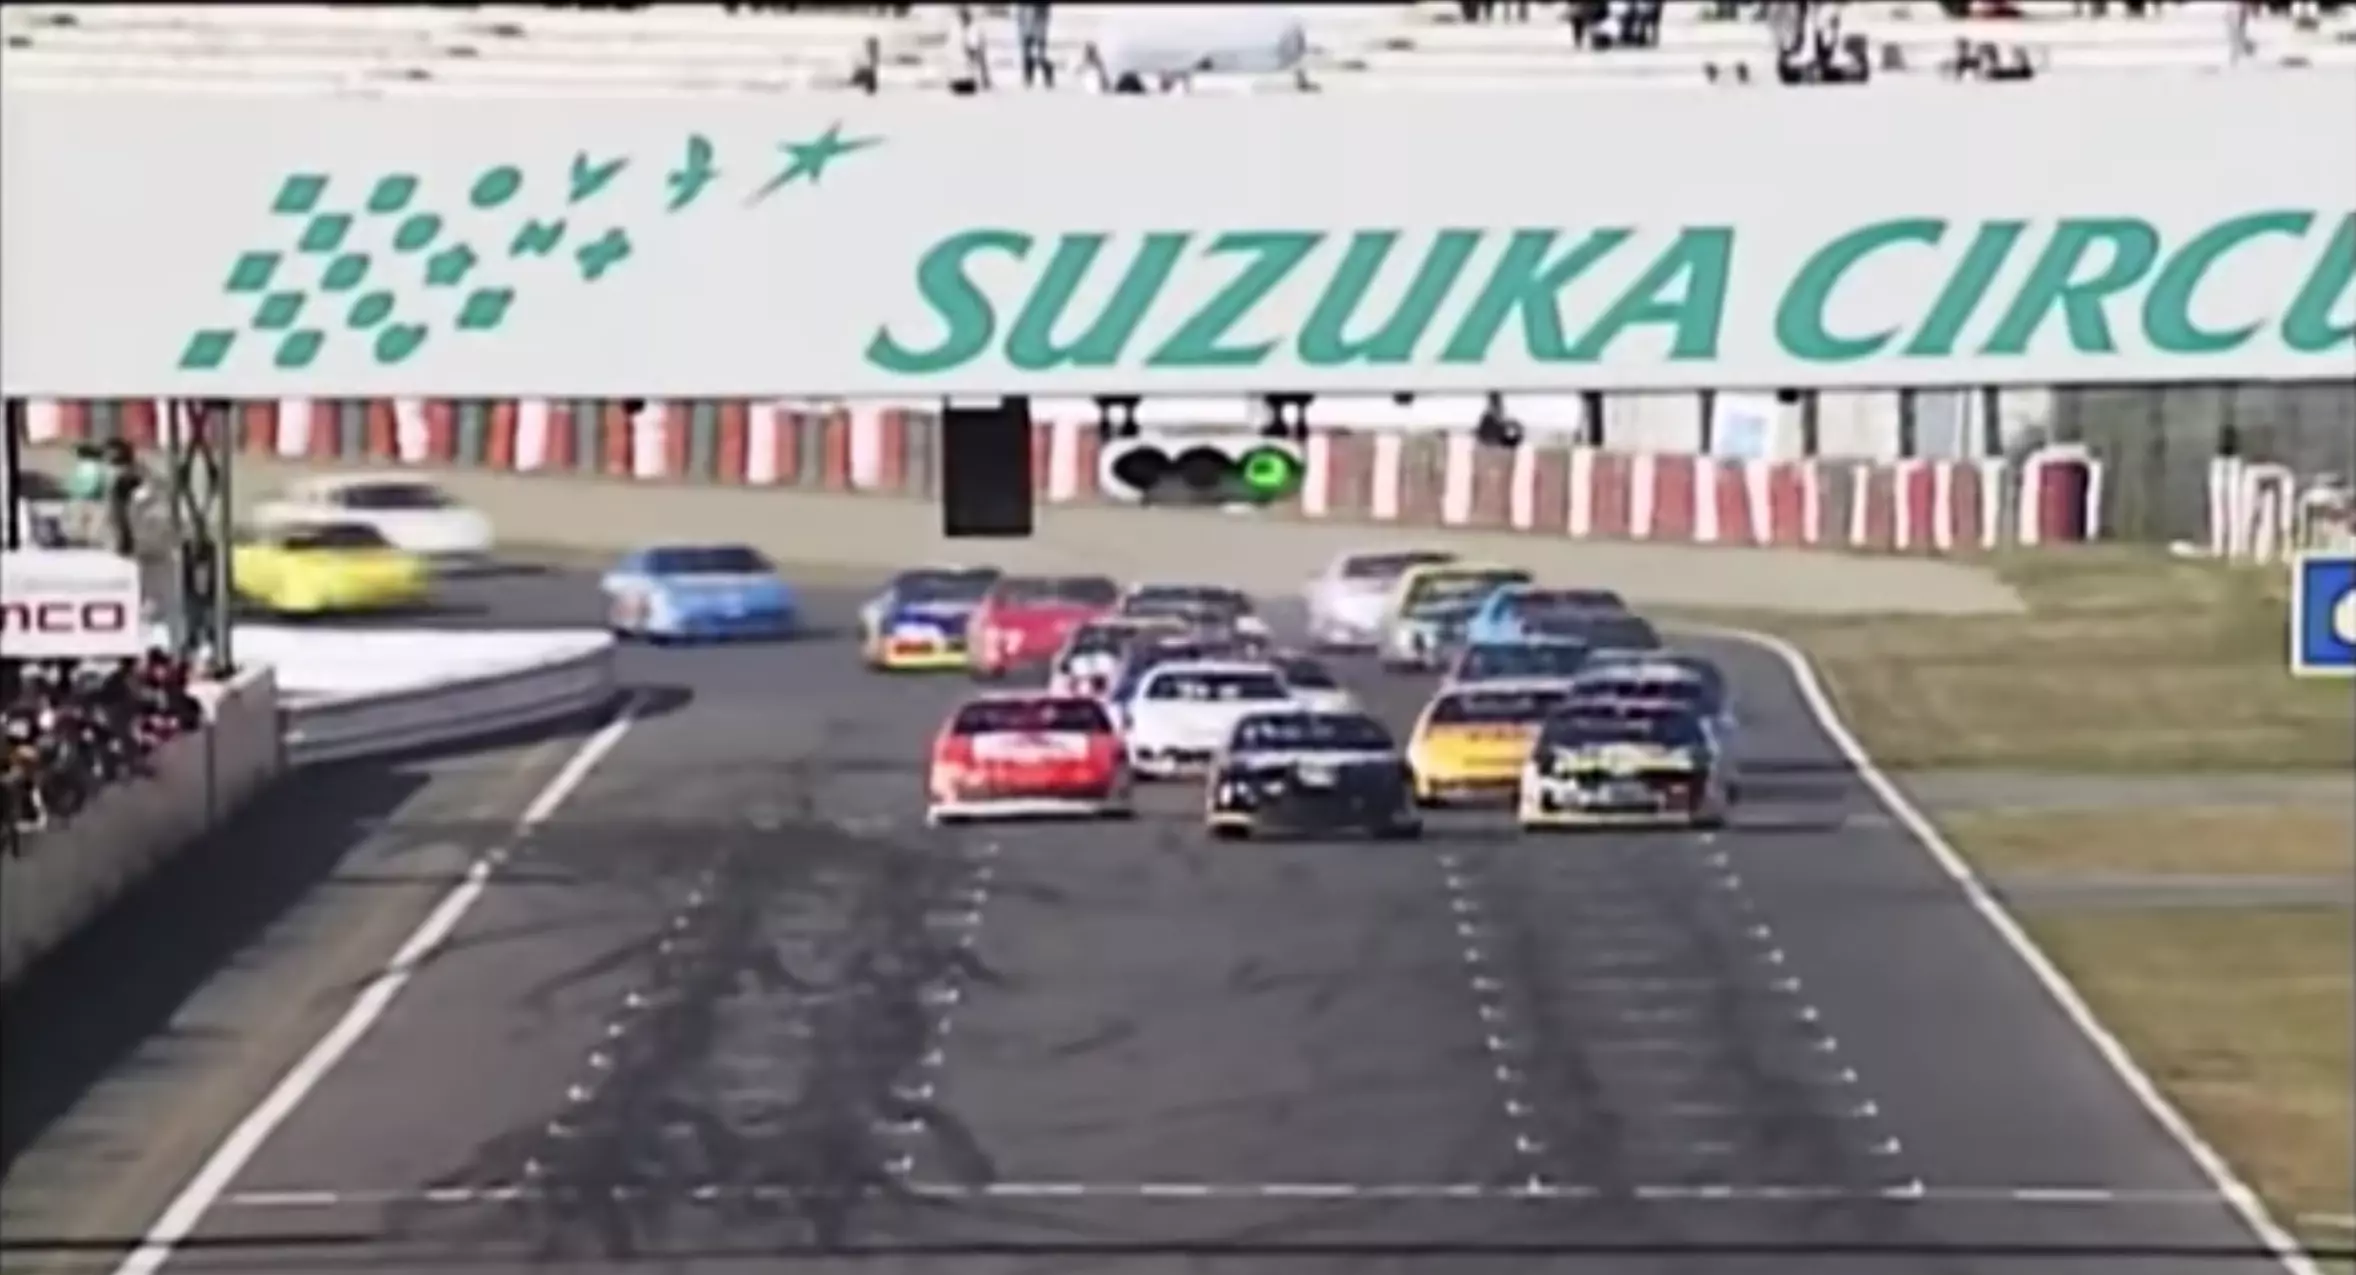 Remember When NASCAR Went to Japan and Raced at Suzuka? Yeah, That Happened | Autance